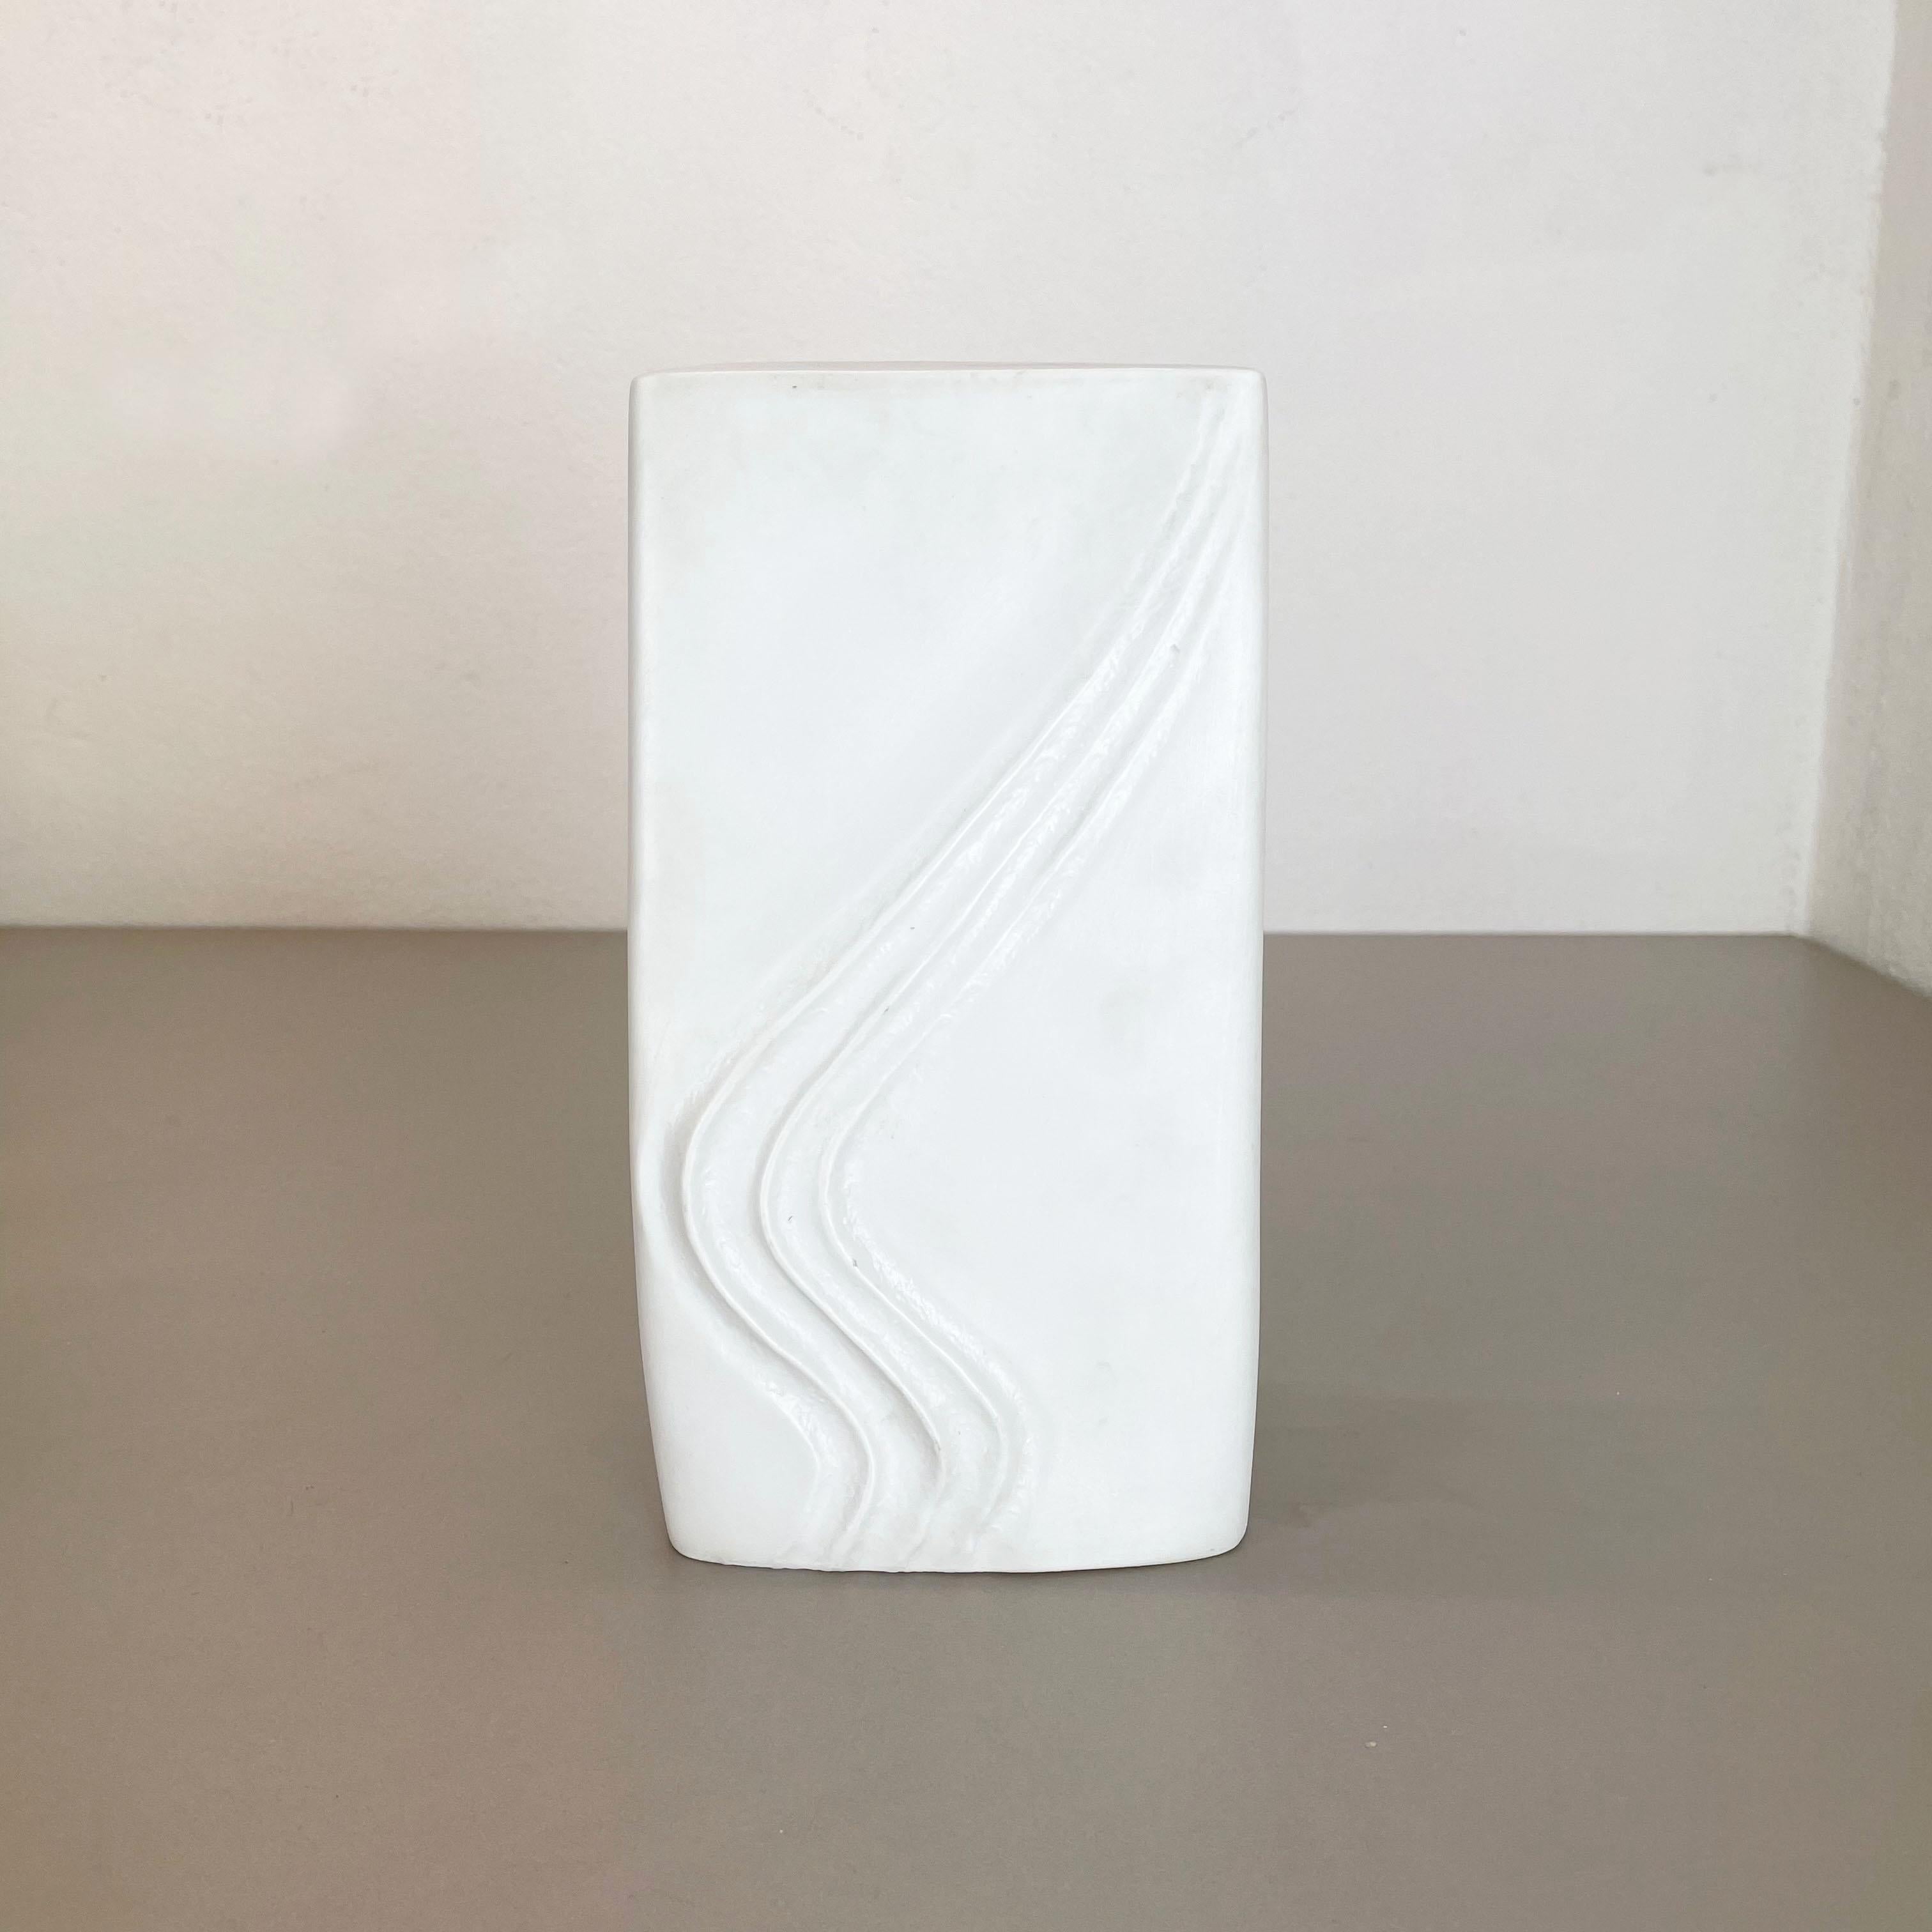 Article:

OP Art Porcelain vase


Producer:

Rosenthal, Germany


Designer:

Martin Freyer




Decade:

1970s




This original vintage OP Art vase was produced in the 1970s in Germany. It is made of porcelain with an OP Art